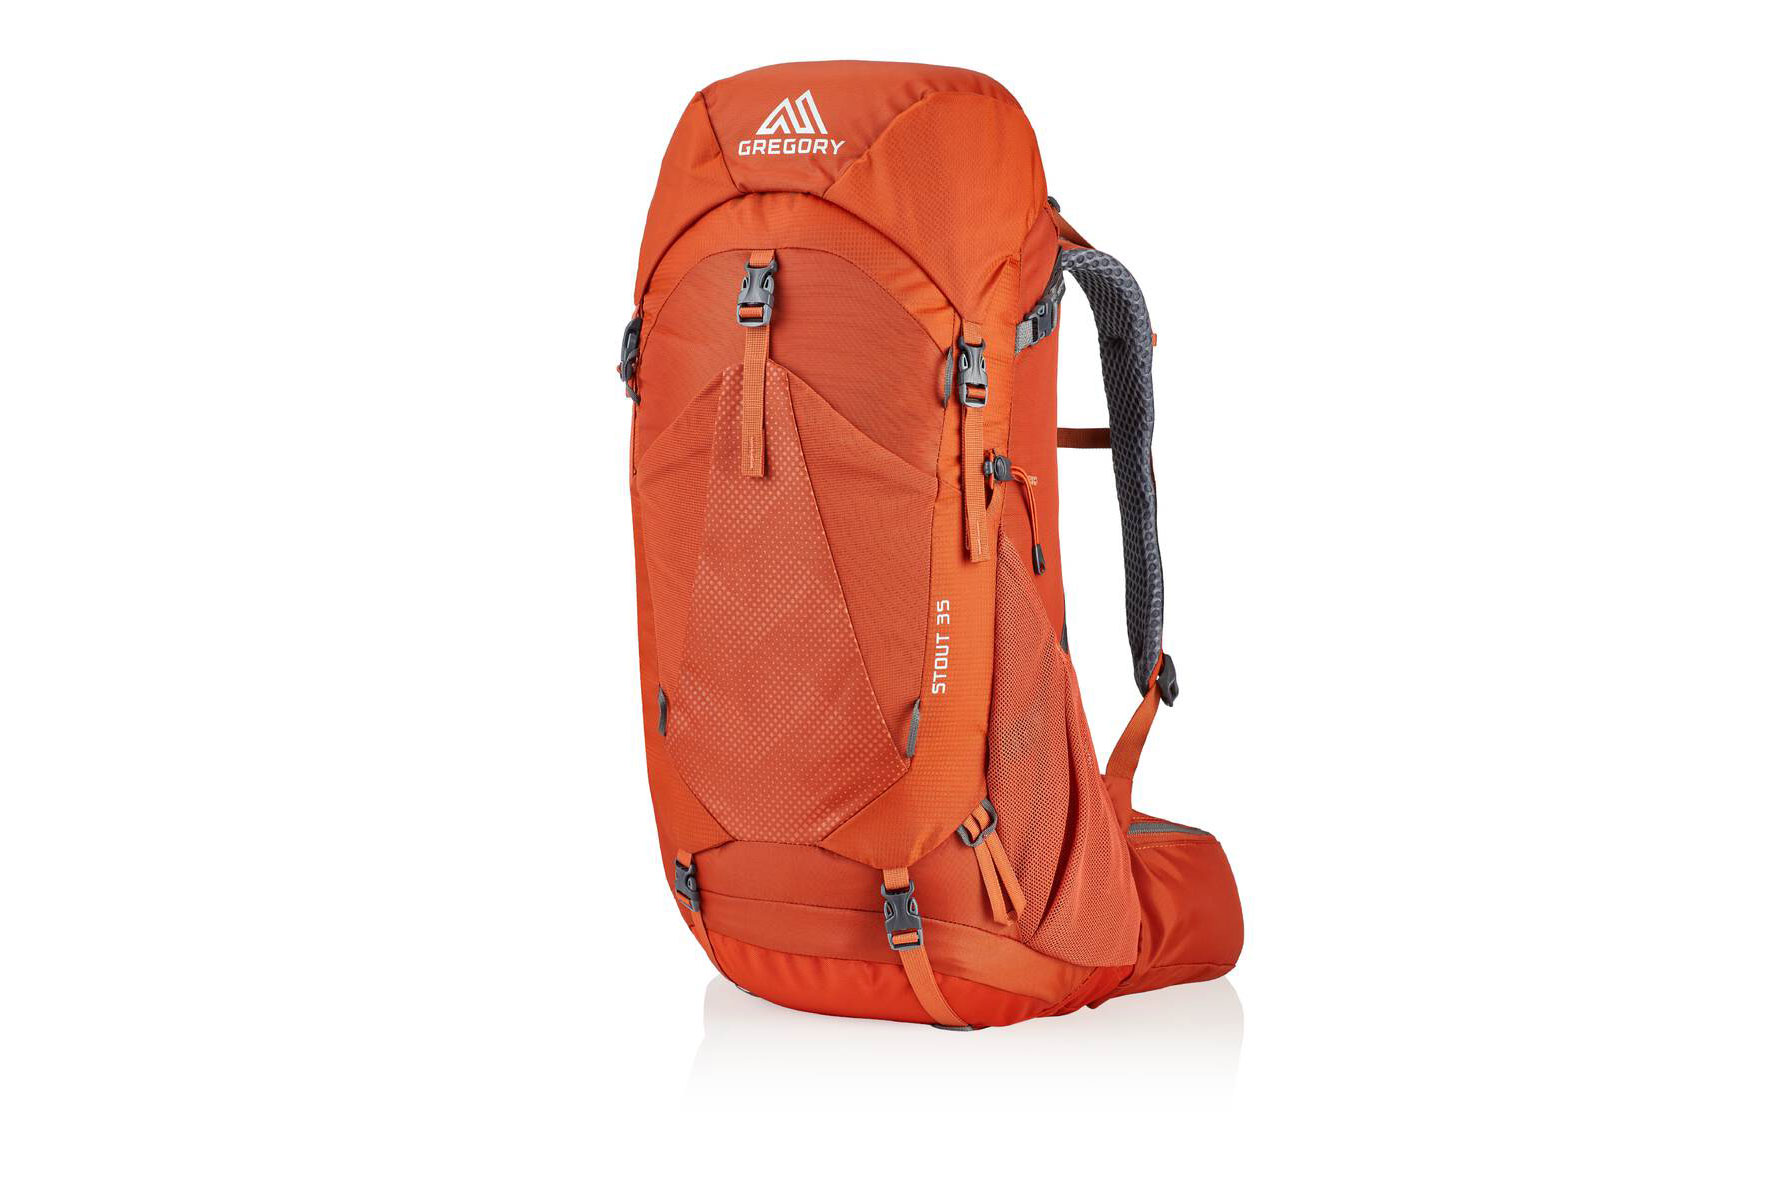 The 25 Best Hiking Gear Items and Accessories To Get You Through